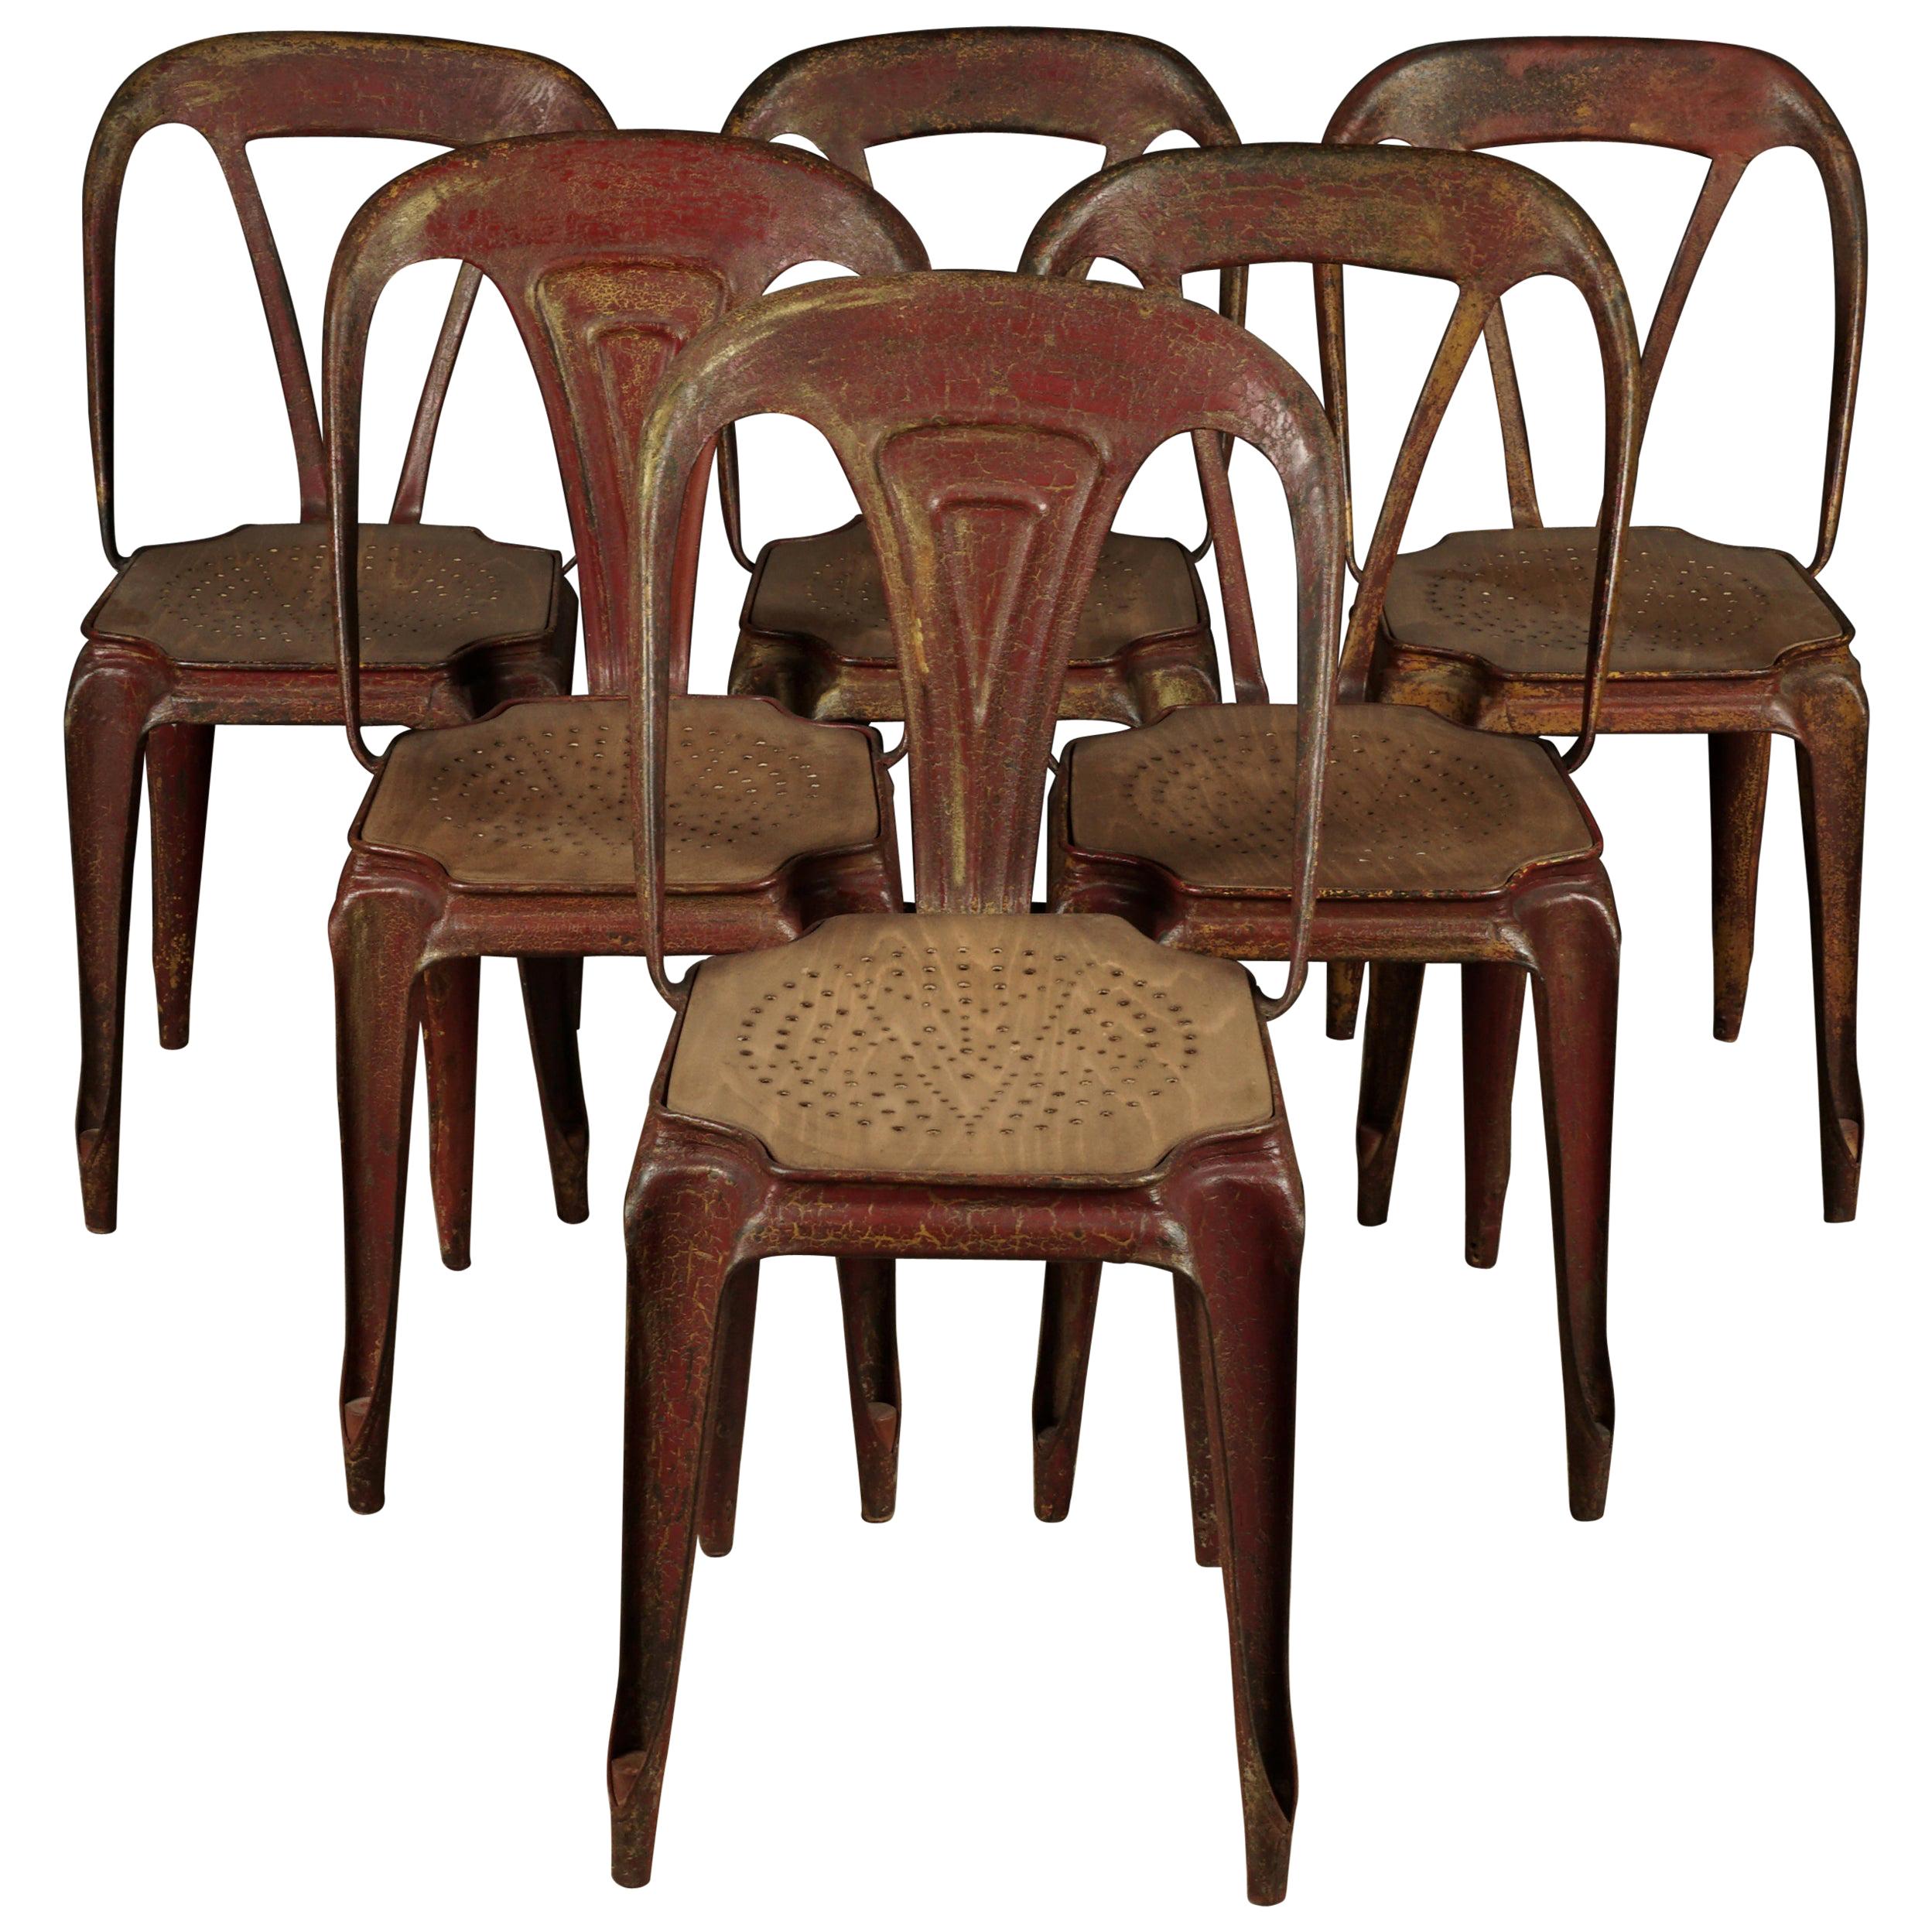 Ref 732 pair of chairs provincial bistro mulched rattan restaurant tavern brasserie 1940 Alsace french wood bistro chairs No bentwood